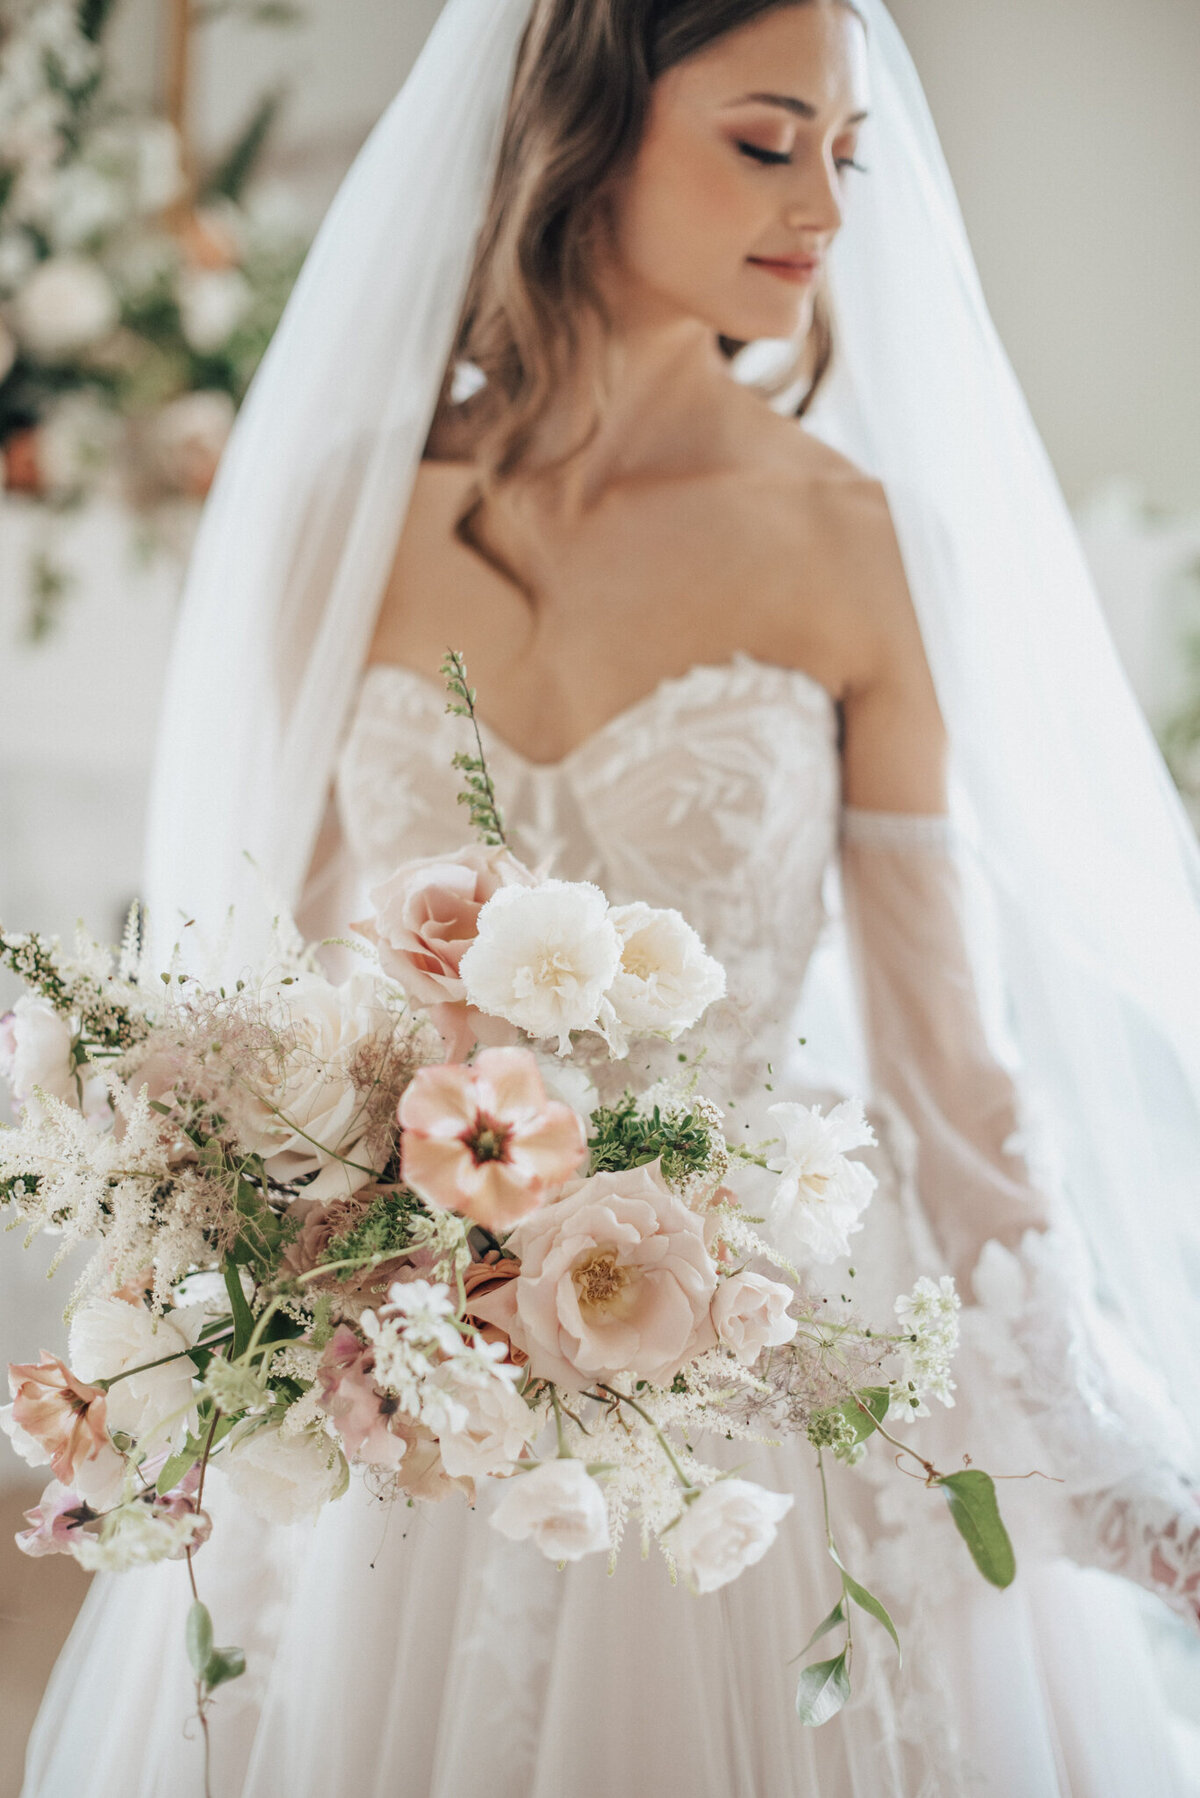 Gorgeous pink and white bridal bouquet by Calyx Floral Design, an innovative Red Deer, Alberta wedding florist, featured on the Brontë Bride Vendor Guide.